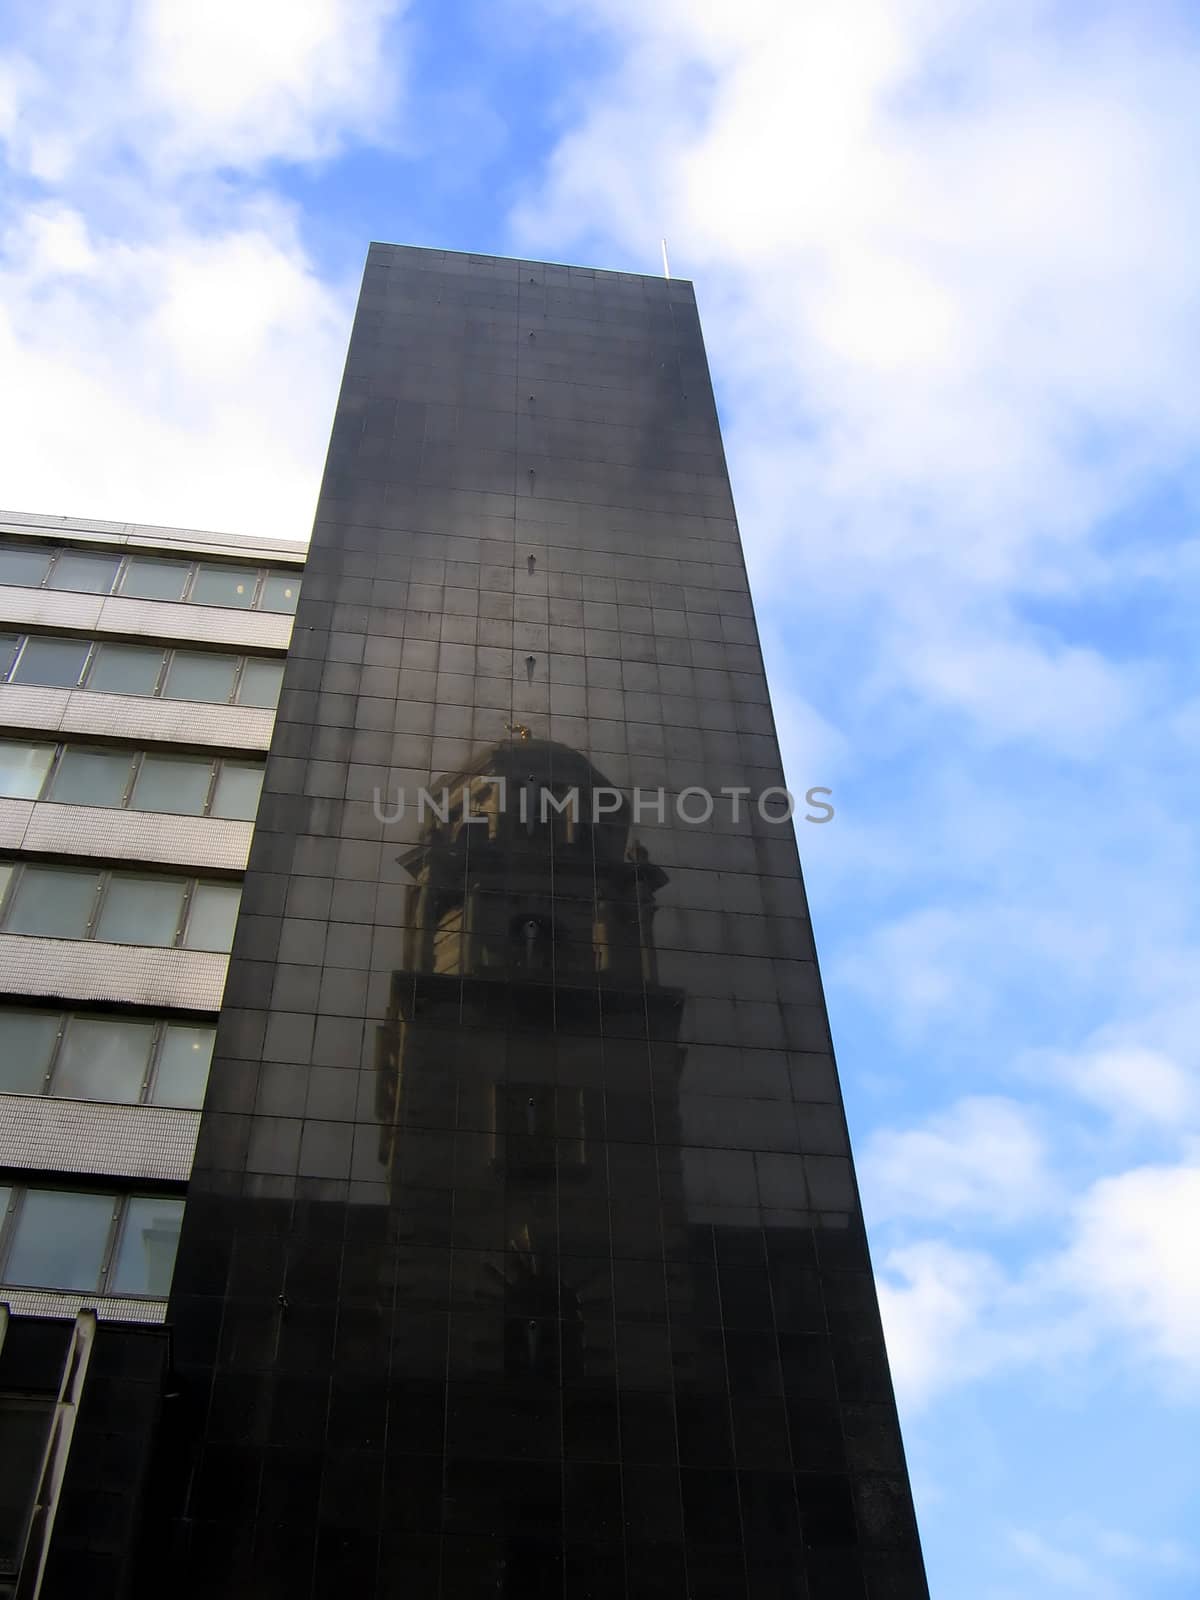 New Building in Liverpool England with Reflection of Old Historic Building in Dark Tiles